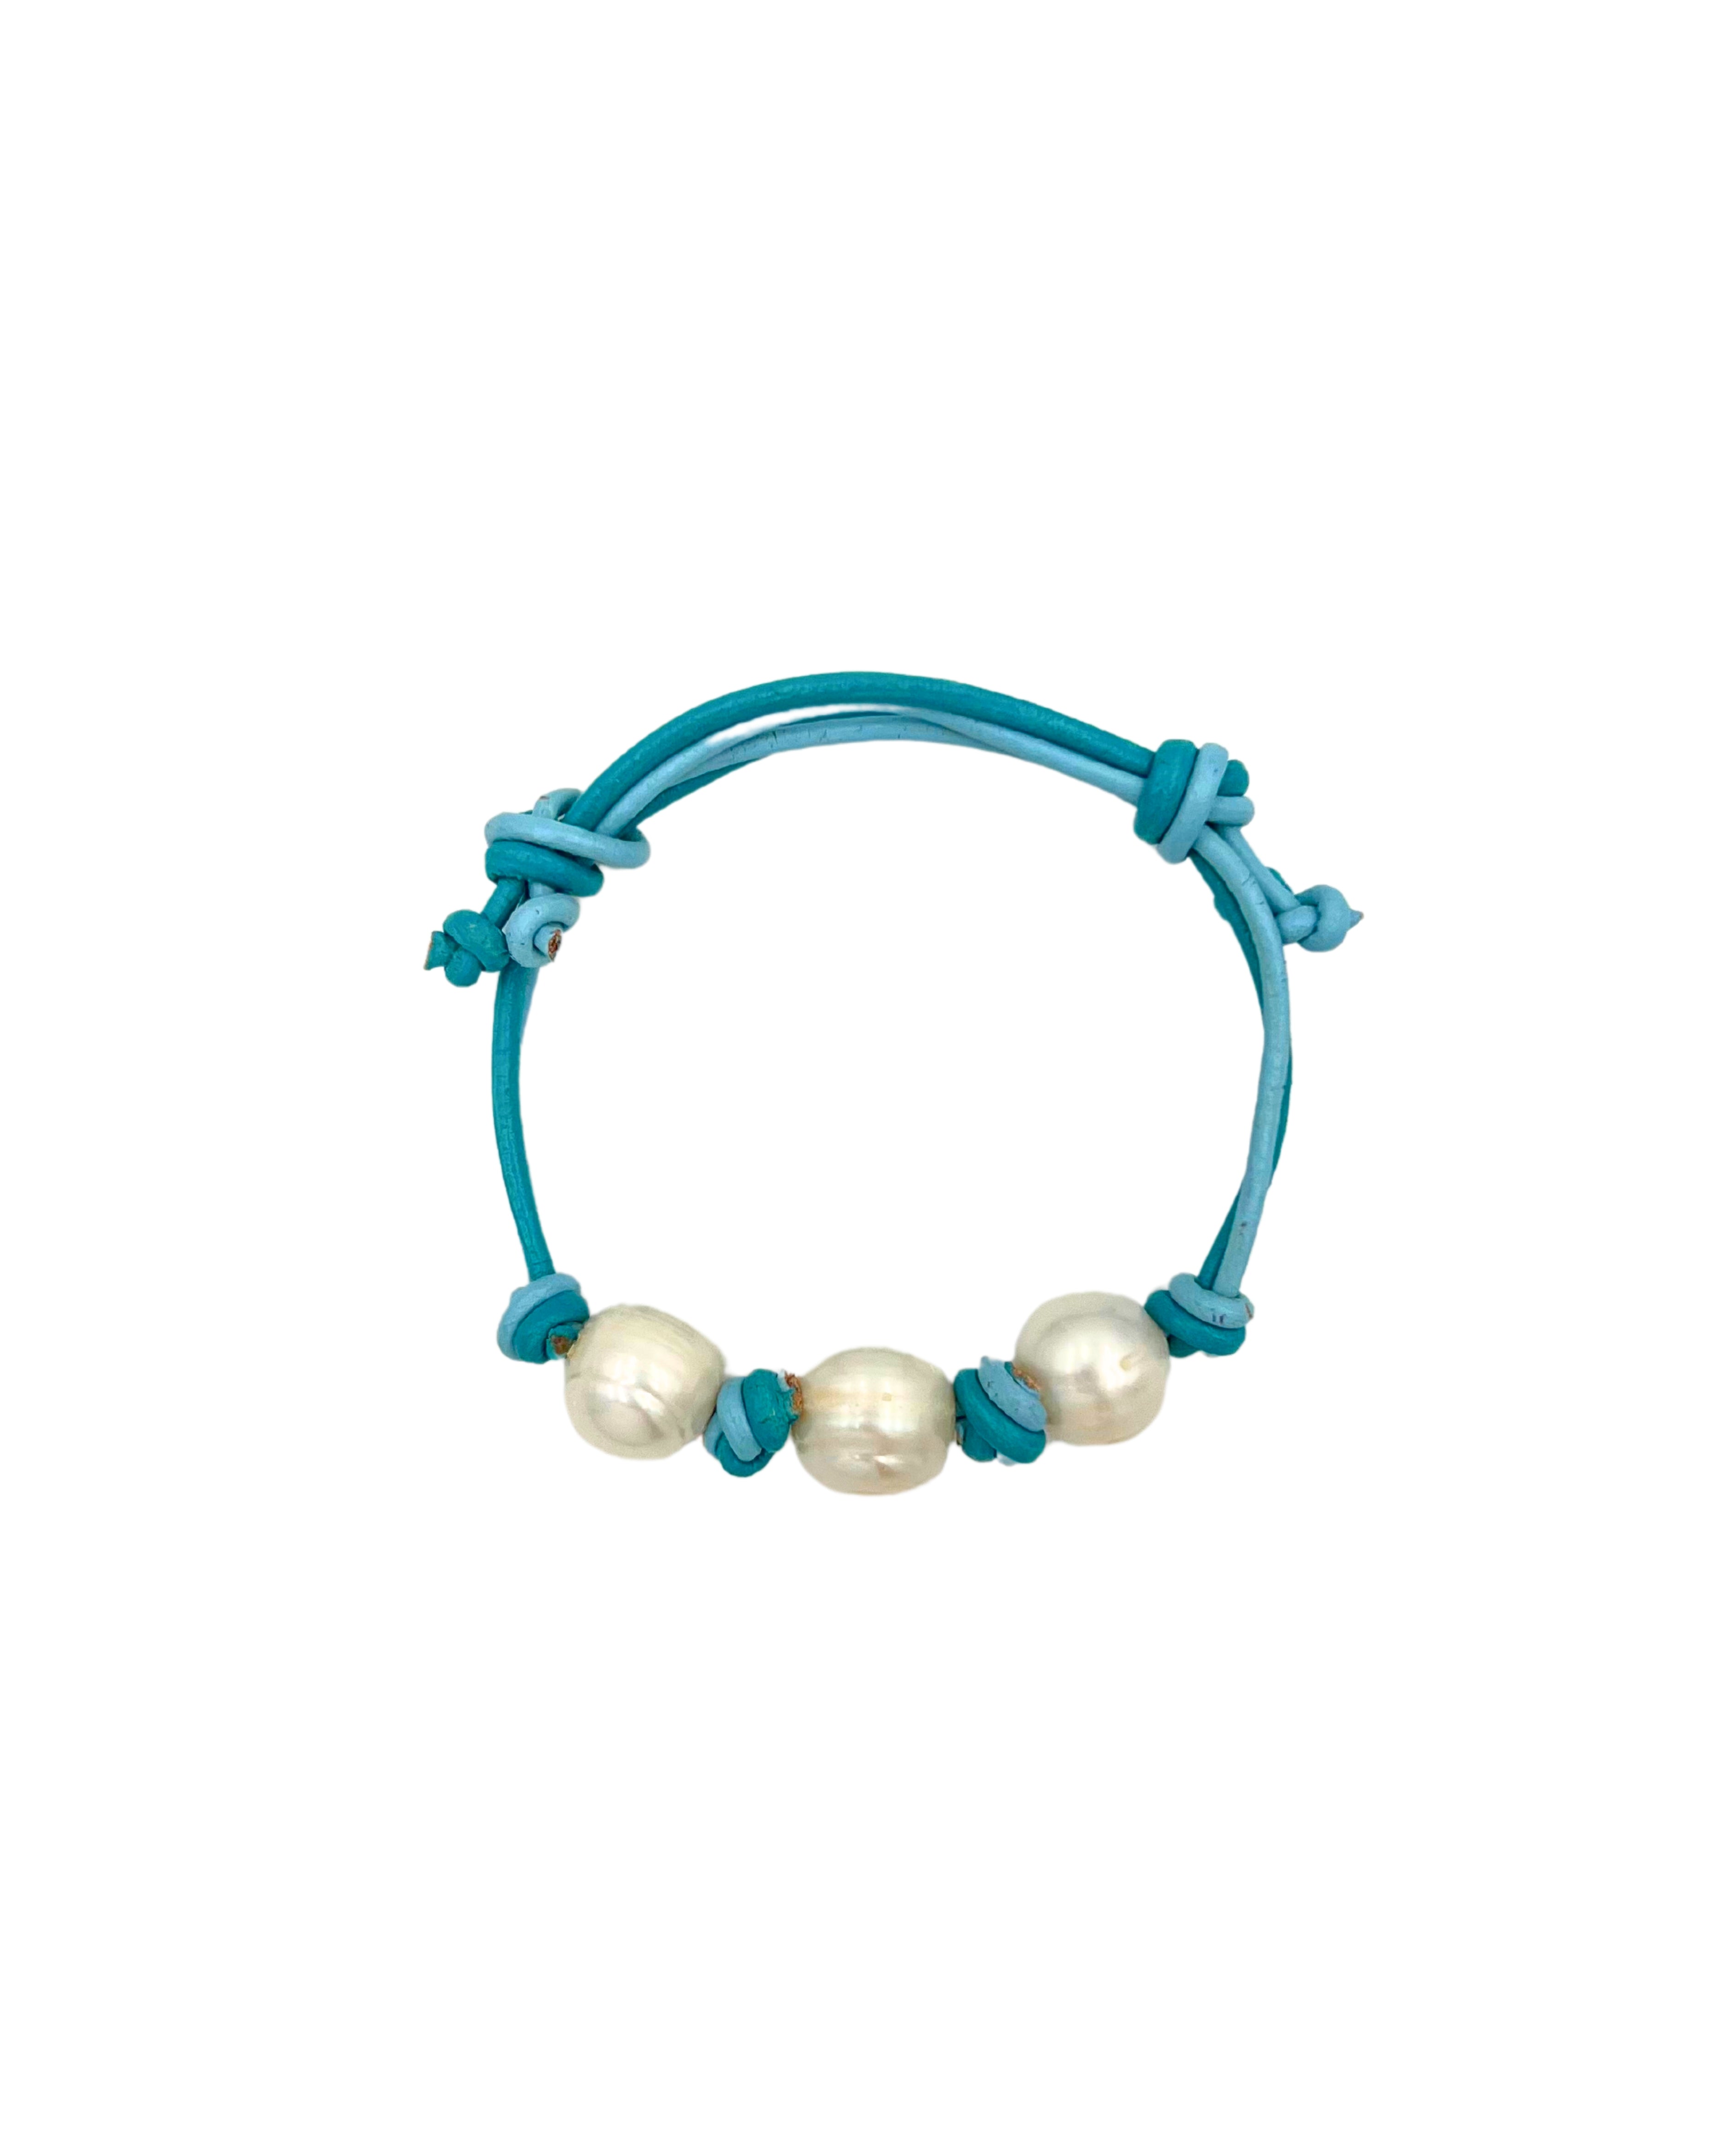 Turquoise Leather and Pearl Adjustable Bracelet